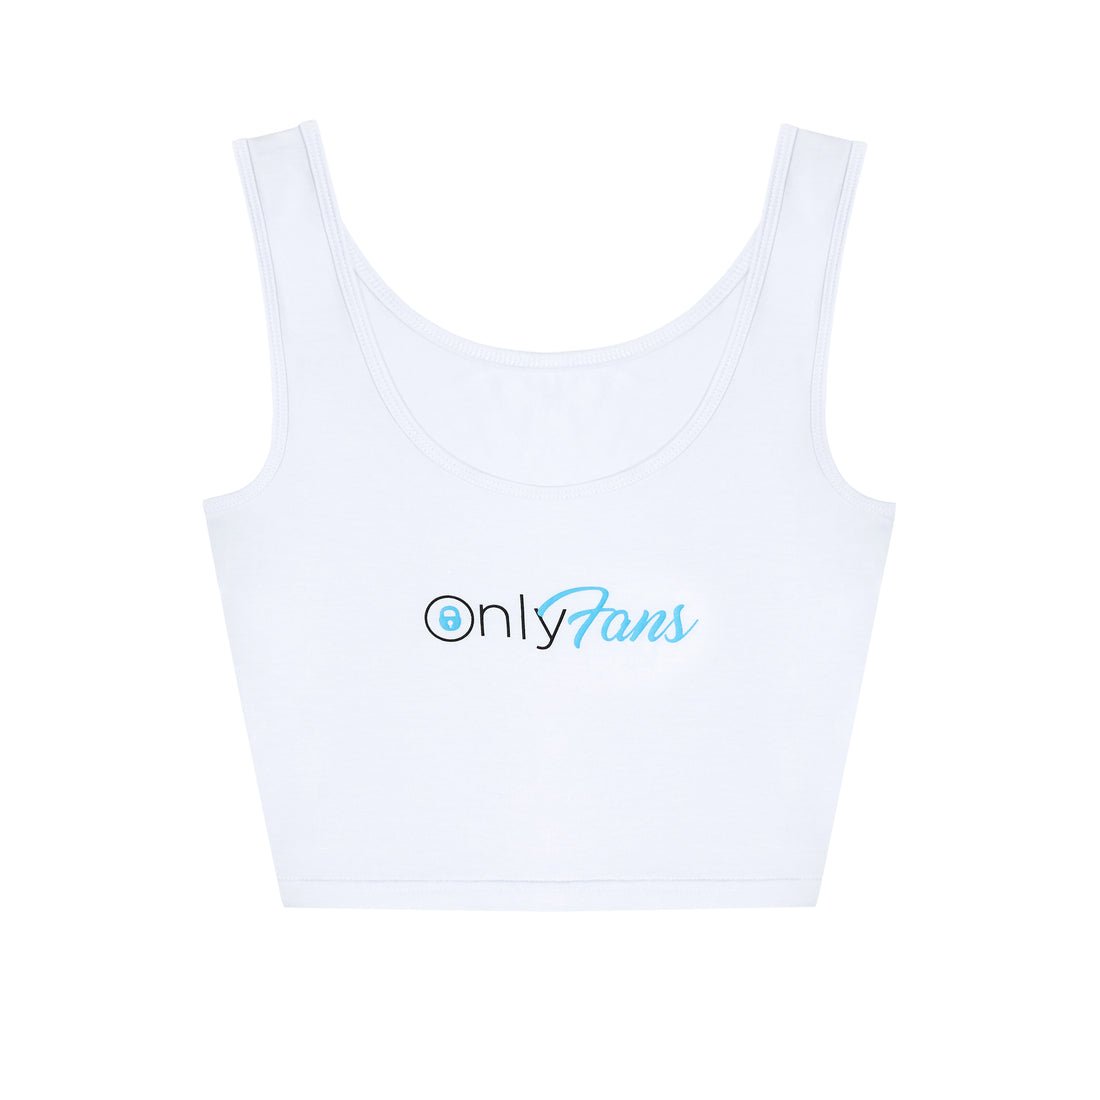 Nysgerrighed veteran and OnlyFans Crop Tank – OnlyFans Store